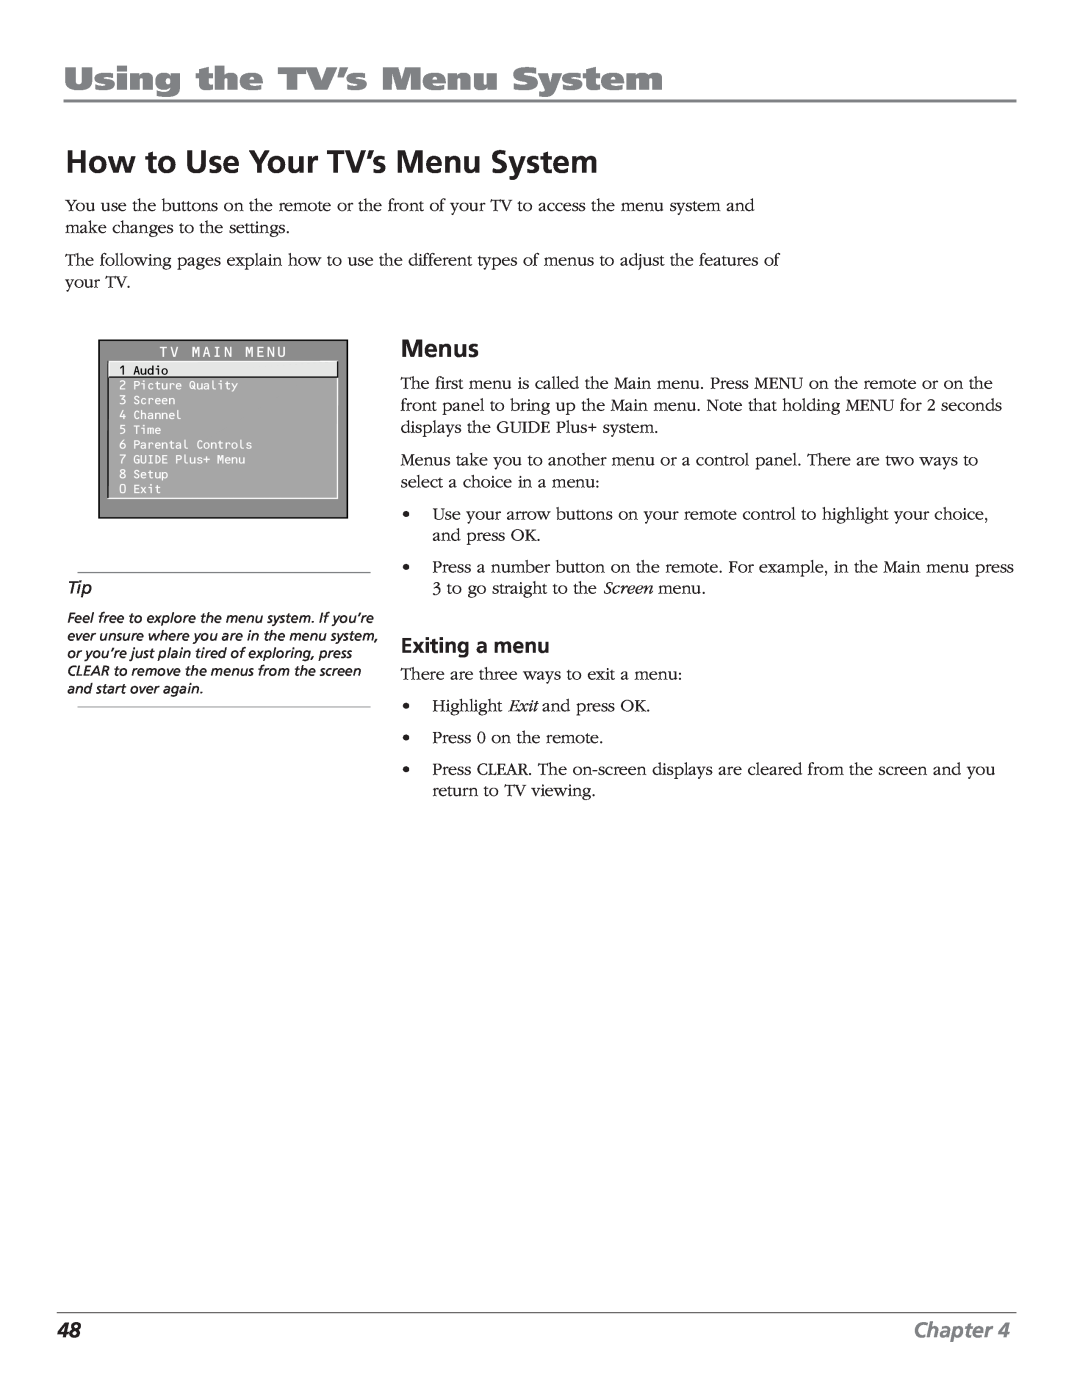 RCA F27669 manual Using the TV’s Menu System, How to Use Your TV’s Menu System, Menus, Exiting a menu, Chapter 